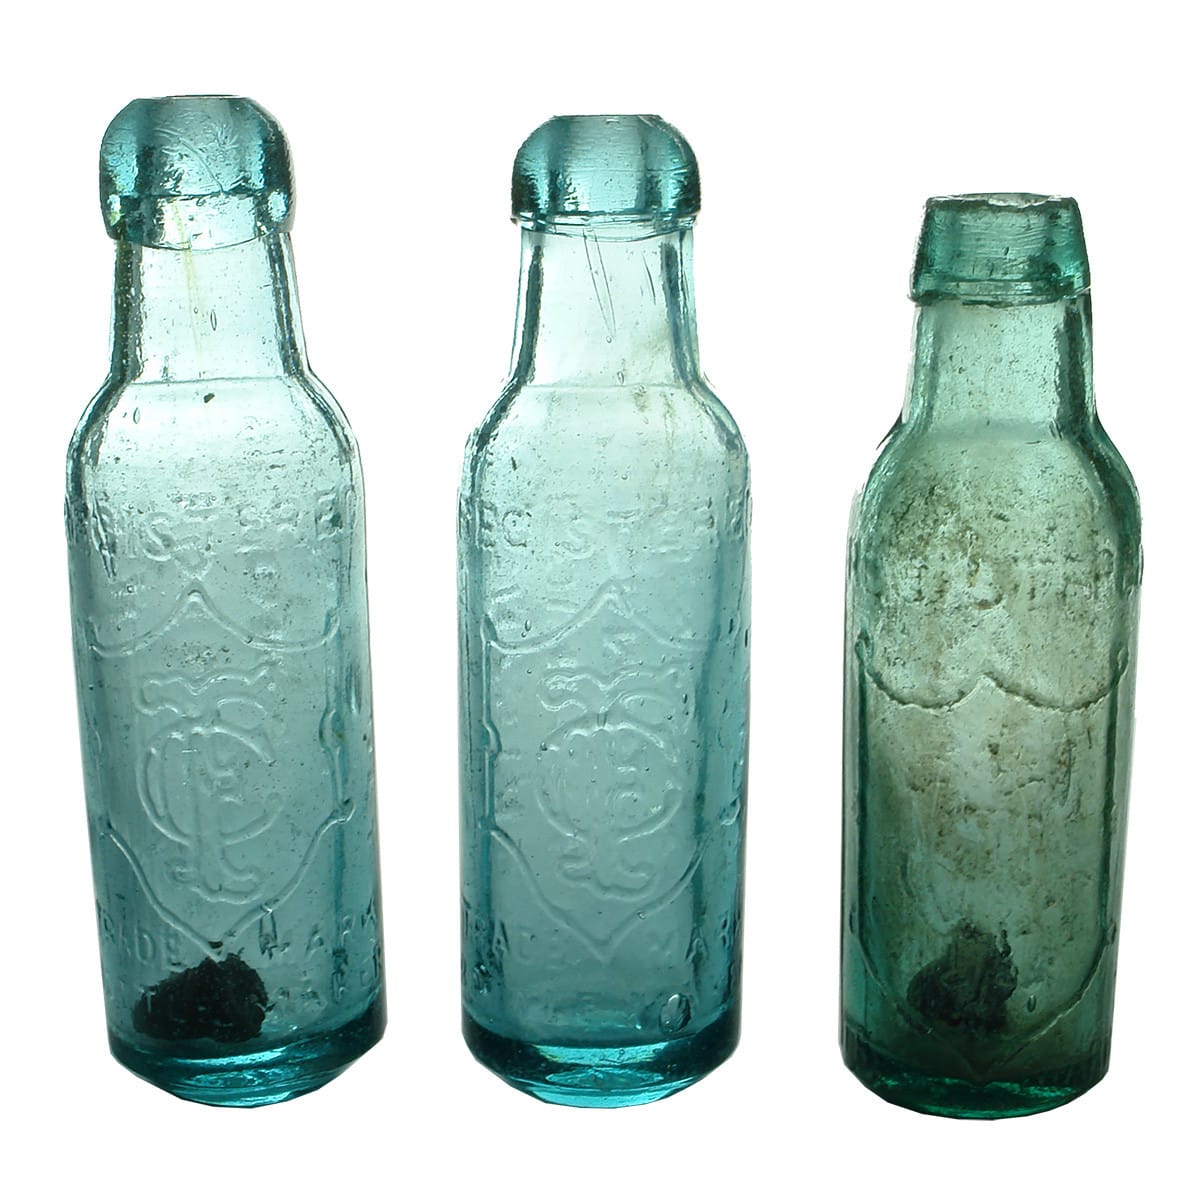 Three Crystal Fountain Bottles: 2 Bluish J. Ross maker bottles; Smaller greenish one with N. S. W. embossed near the base edge. (New South Wales)